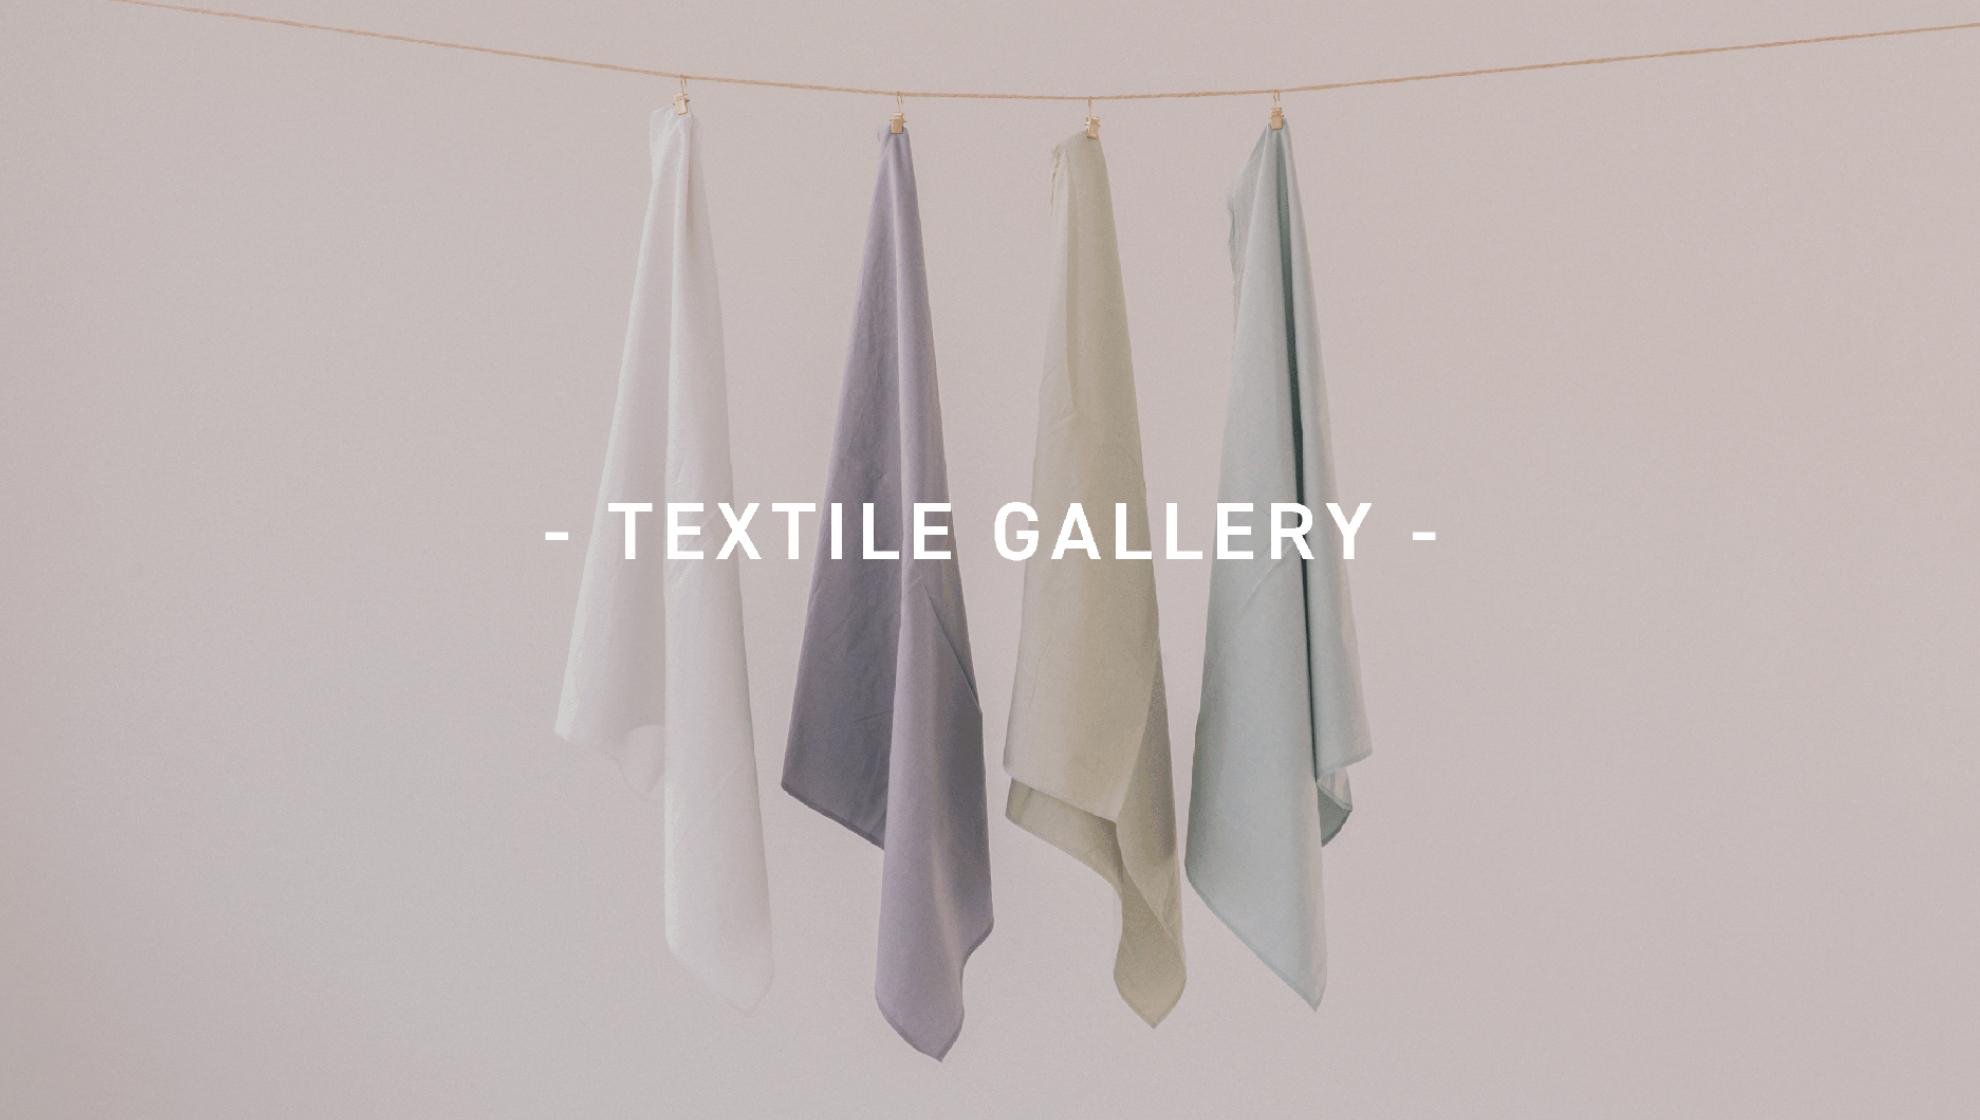 TEXTILE GALLERY